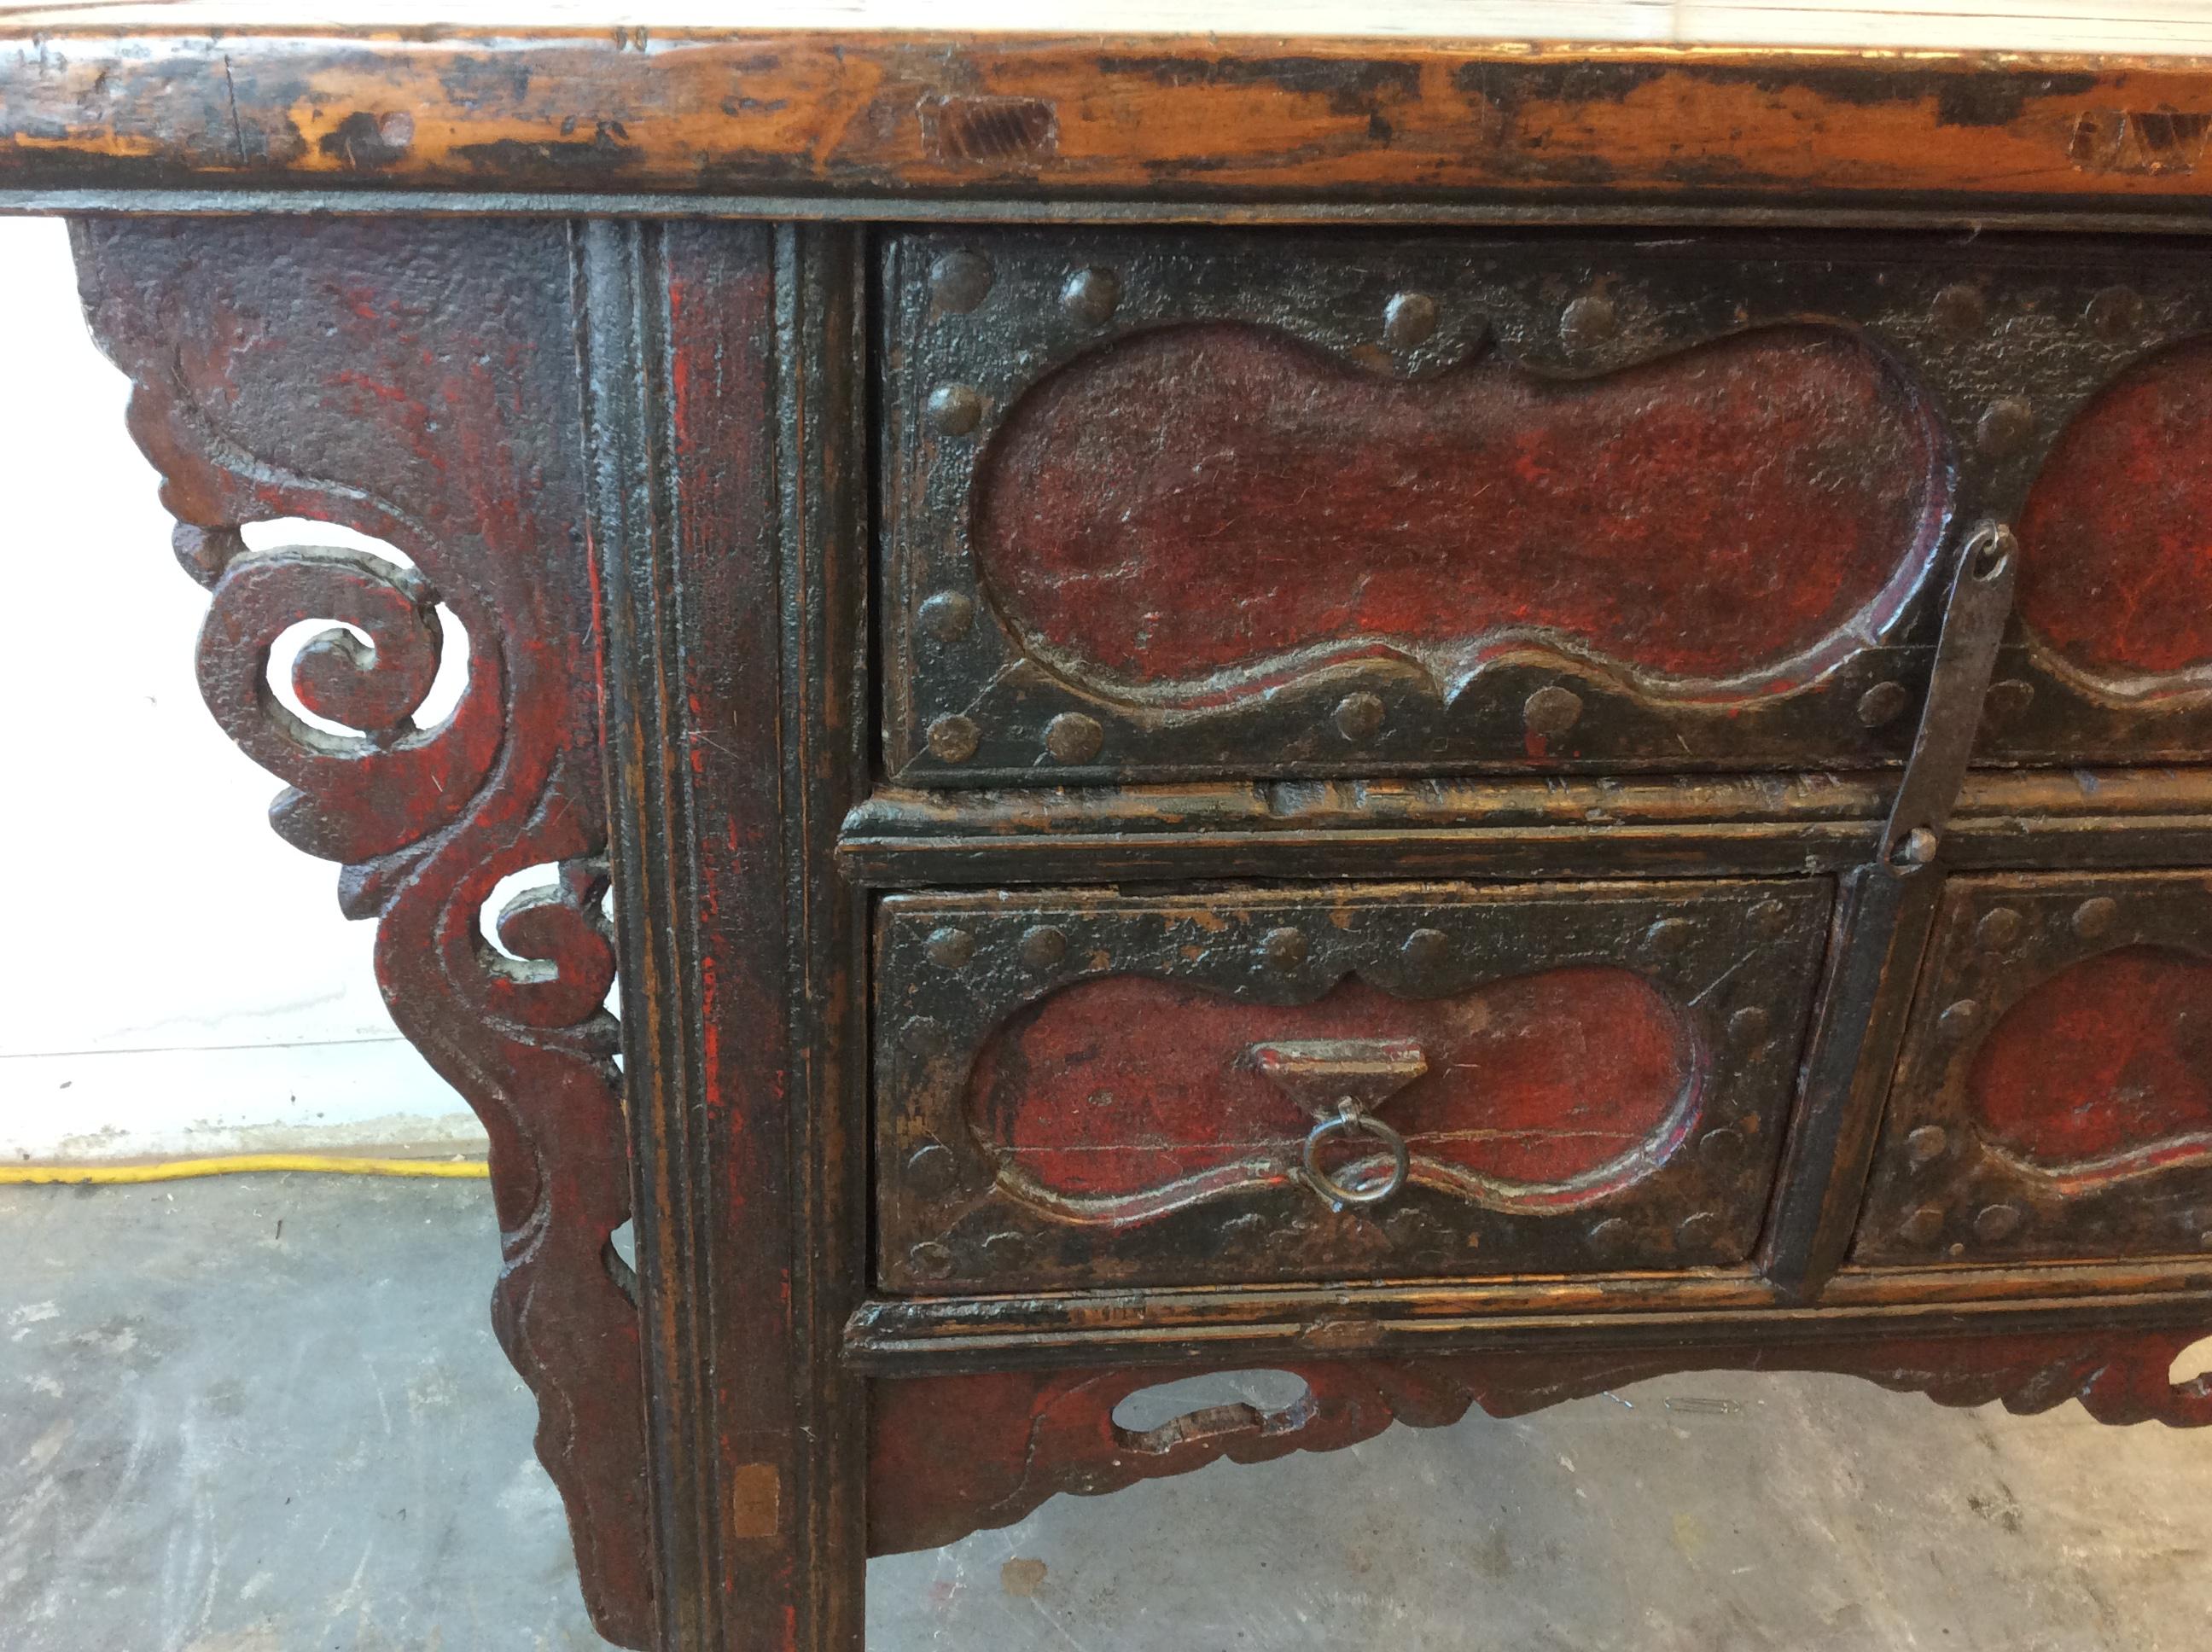 Late 19th / early 20th century three drawer Elm wood Mongolian Altar or butterfly table. This table is late Qing Dynasty and has a great old crazed painted finish and a nice patina to the smoothed over Elm wood top.

Condition: repairs to the